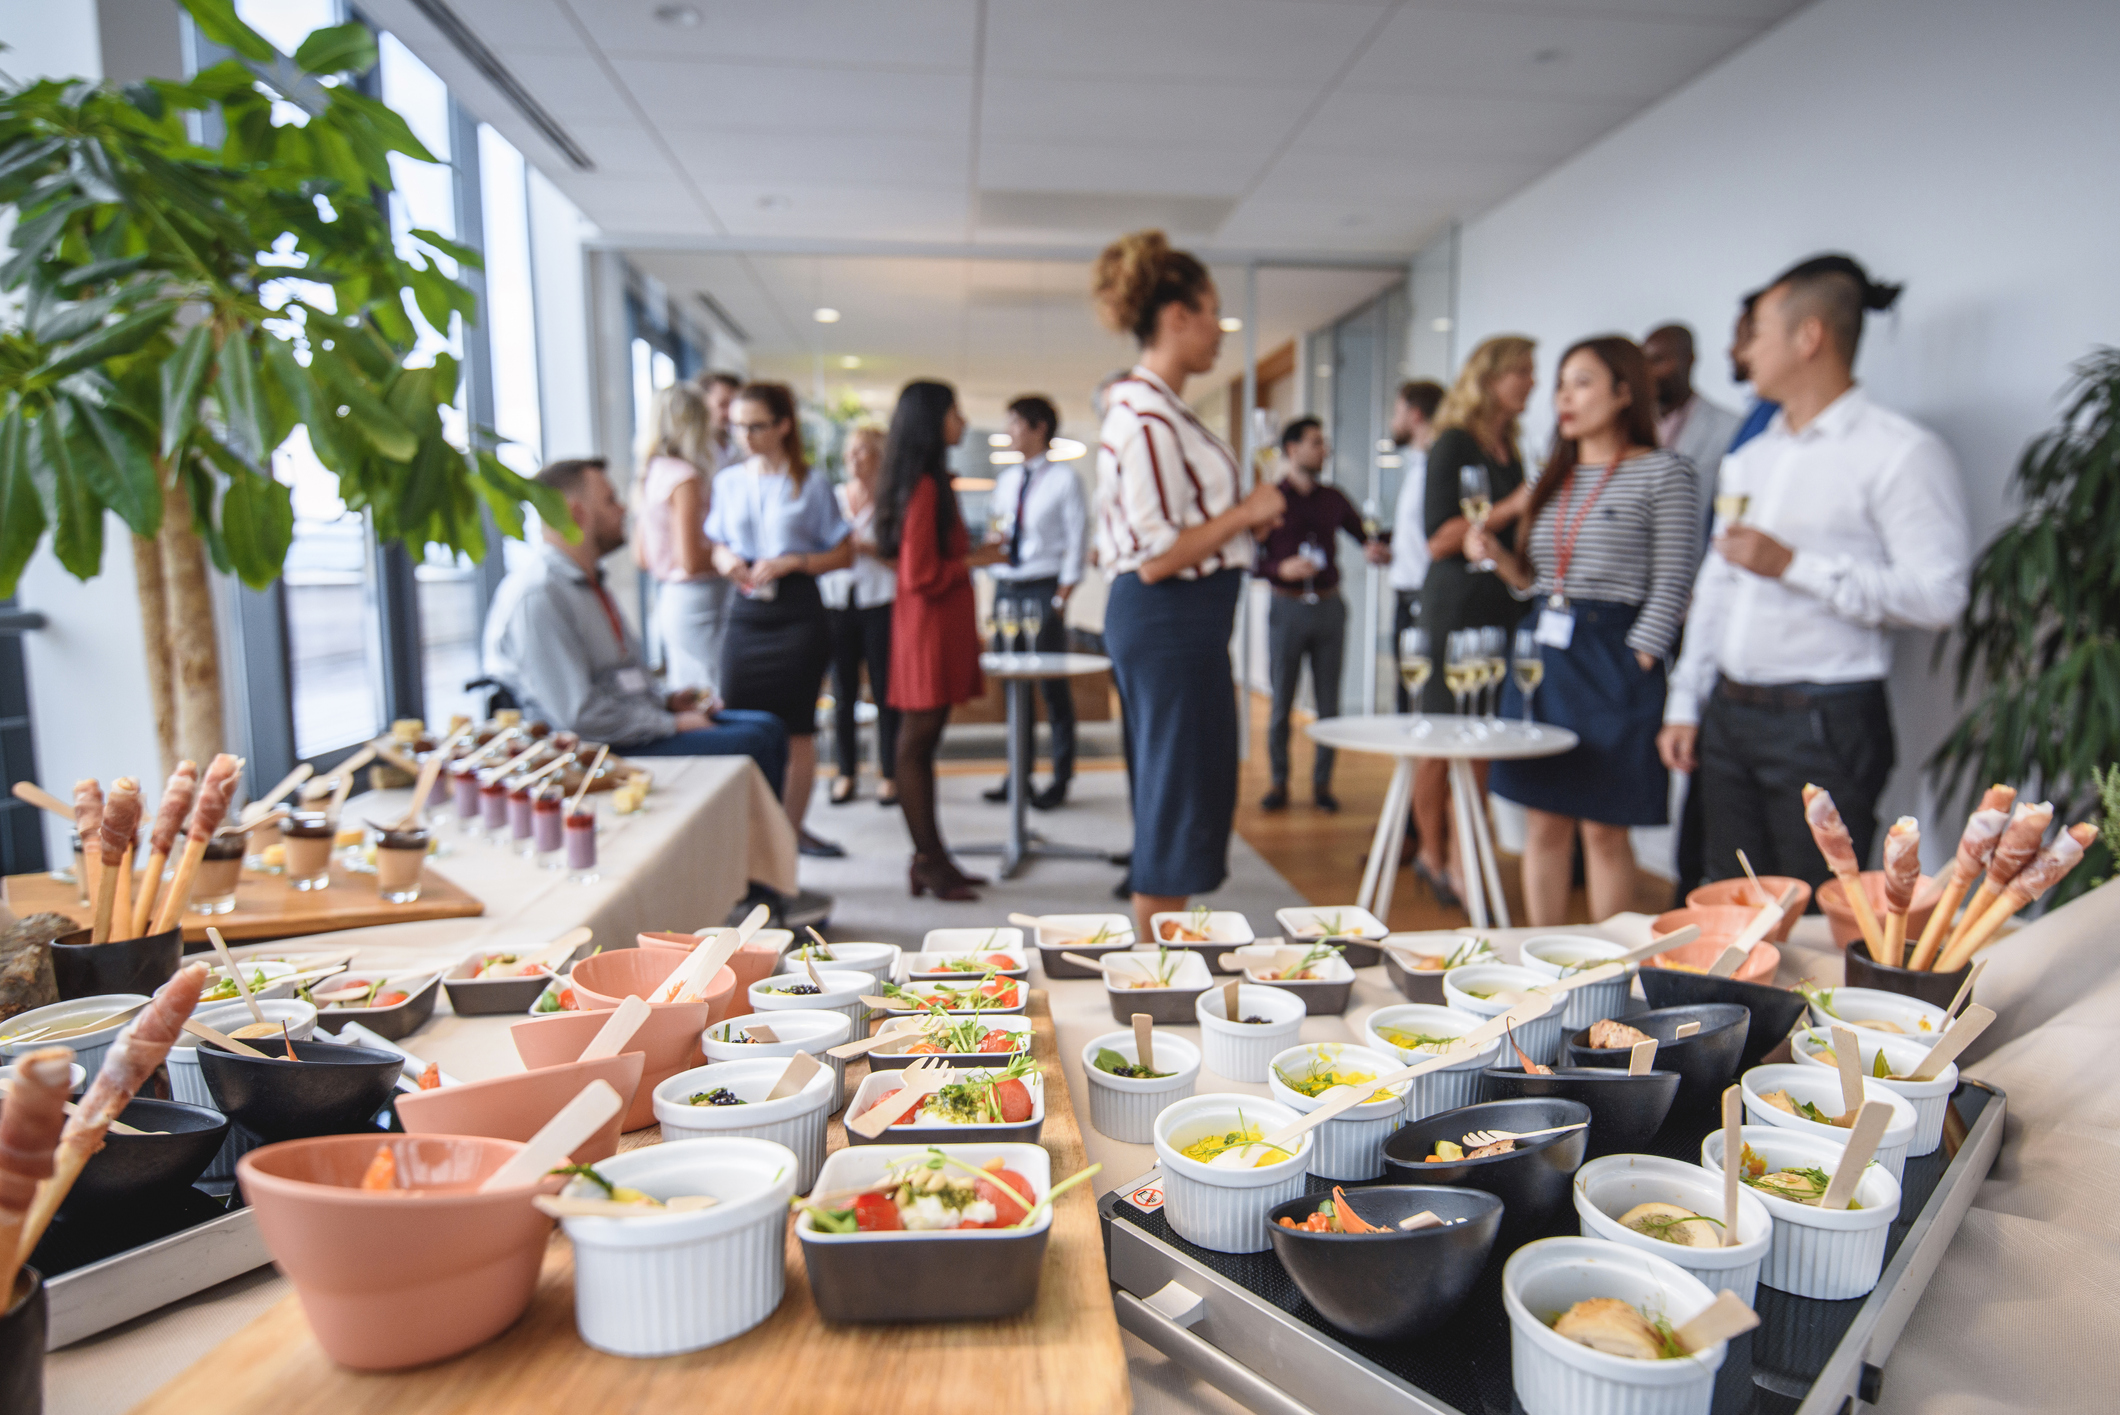 Focus on foreground gourmet small dishes and desserts on buffet tables at new business launch celebration event.